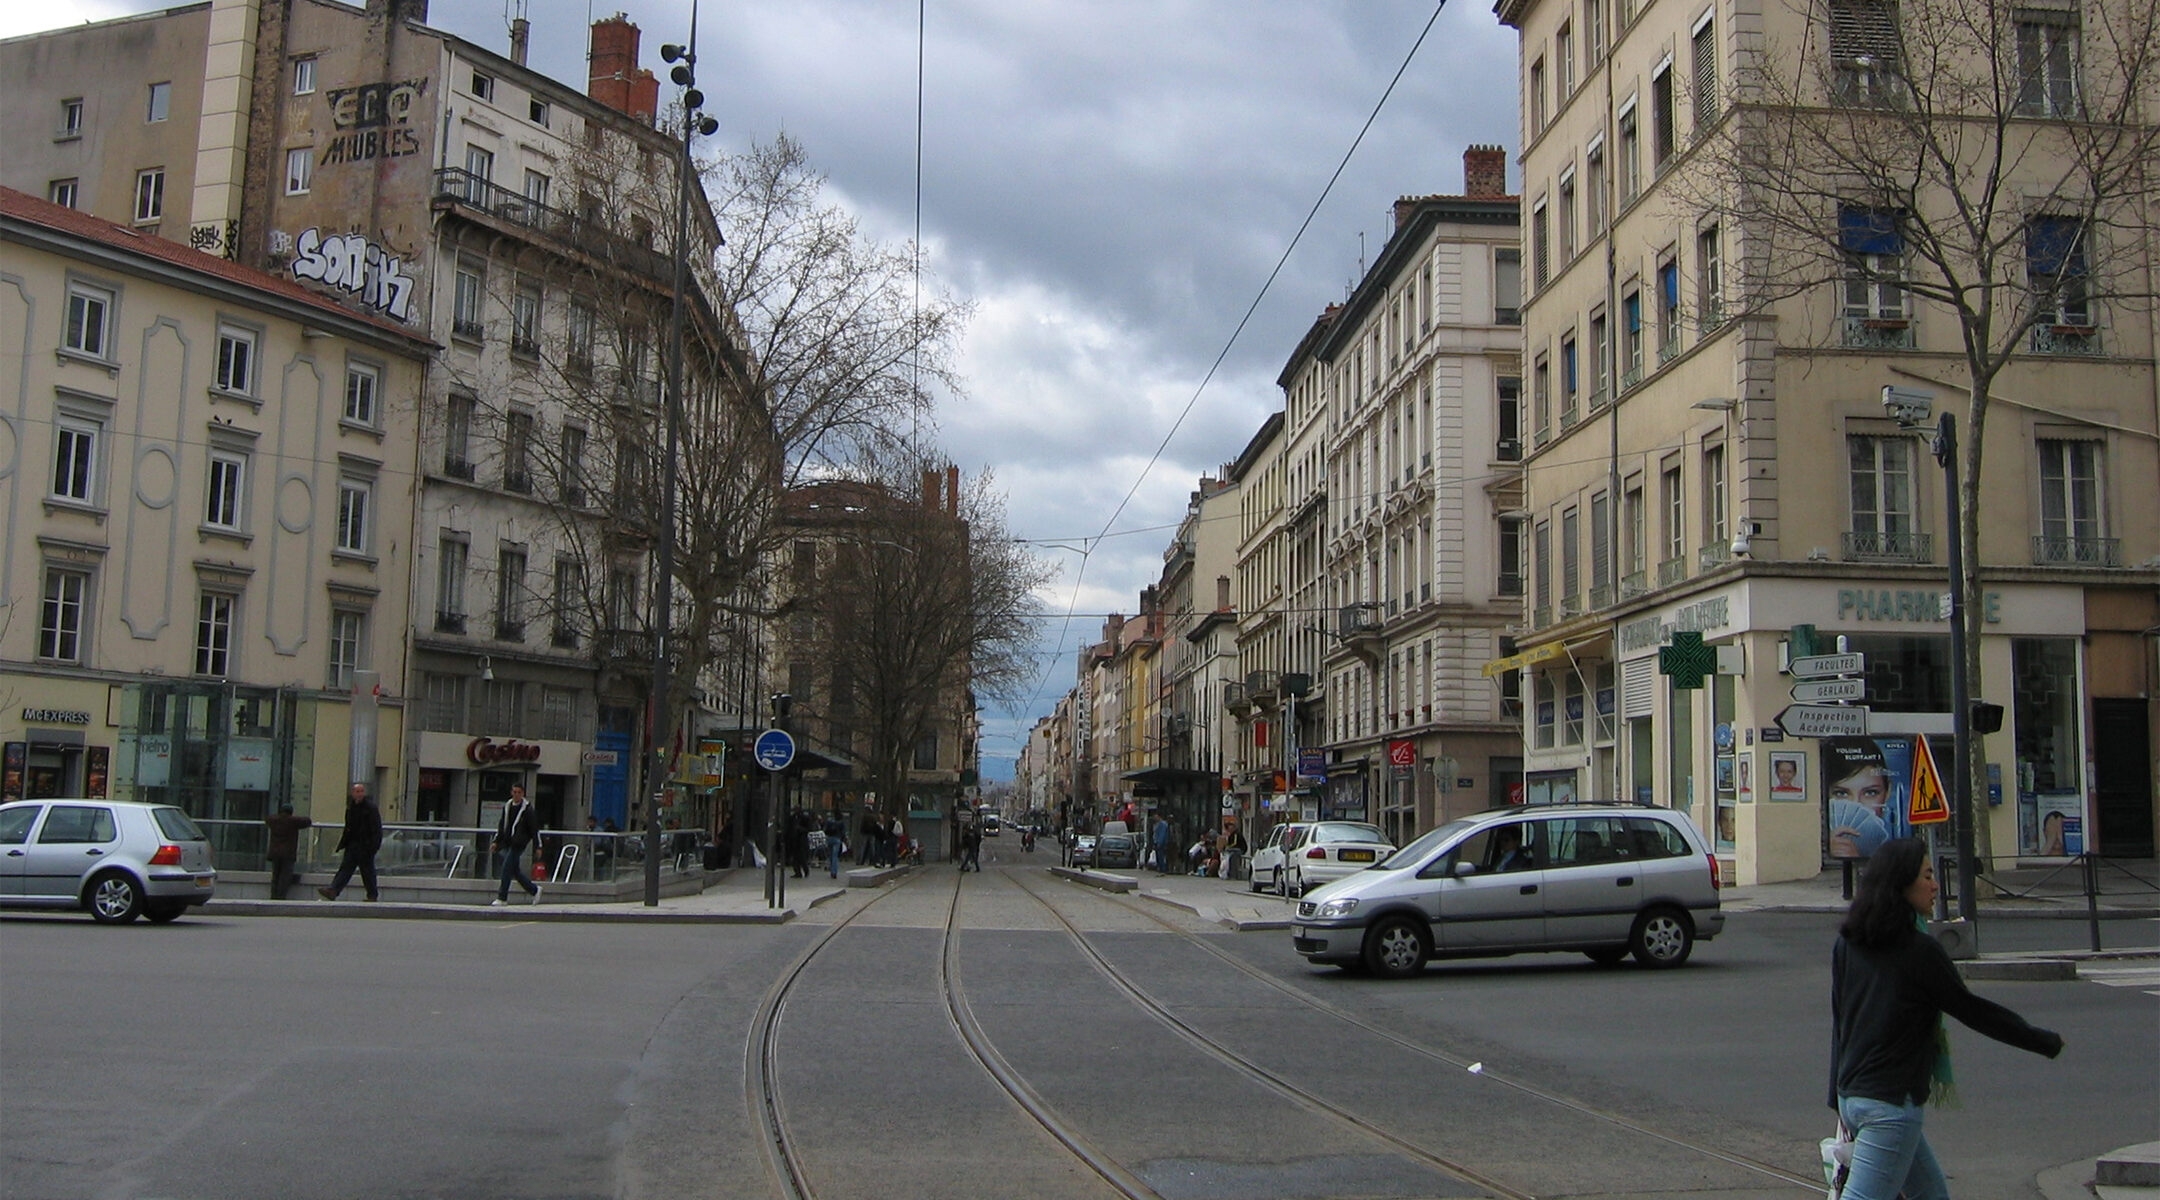 Pedestrians and cars cross Gebrial-Peri Square in Lyon, France on March 28, 2005. (Wikimedia Commons)